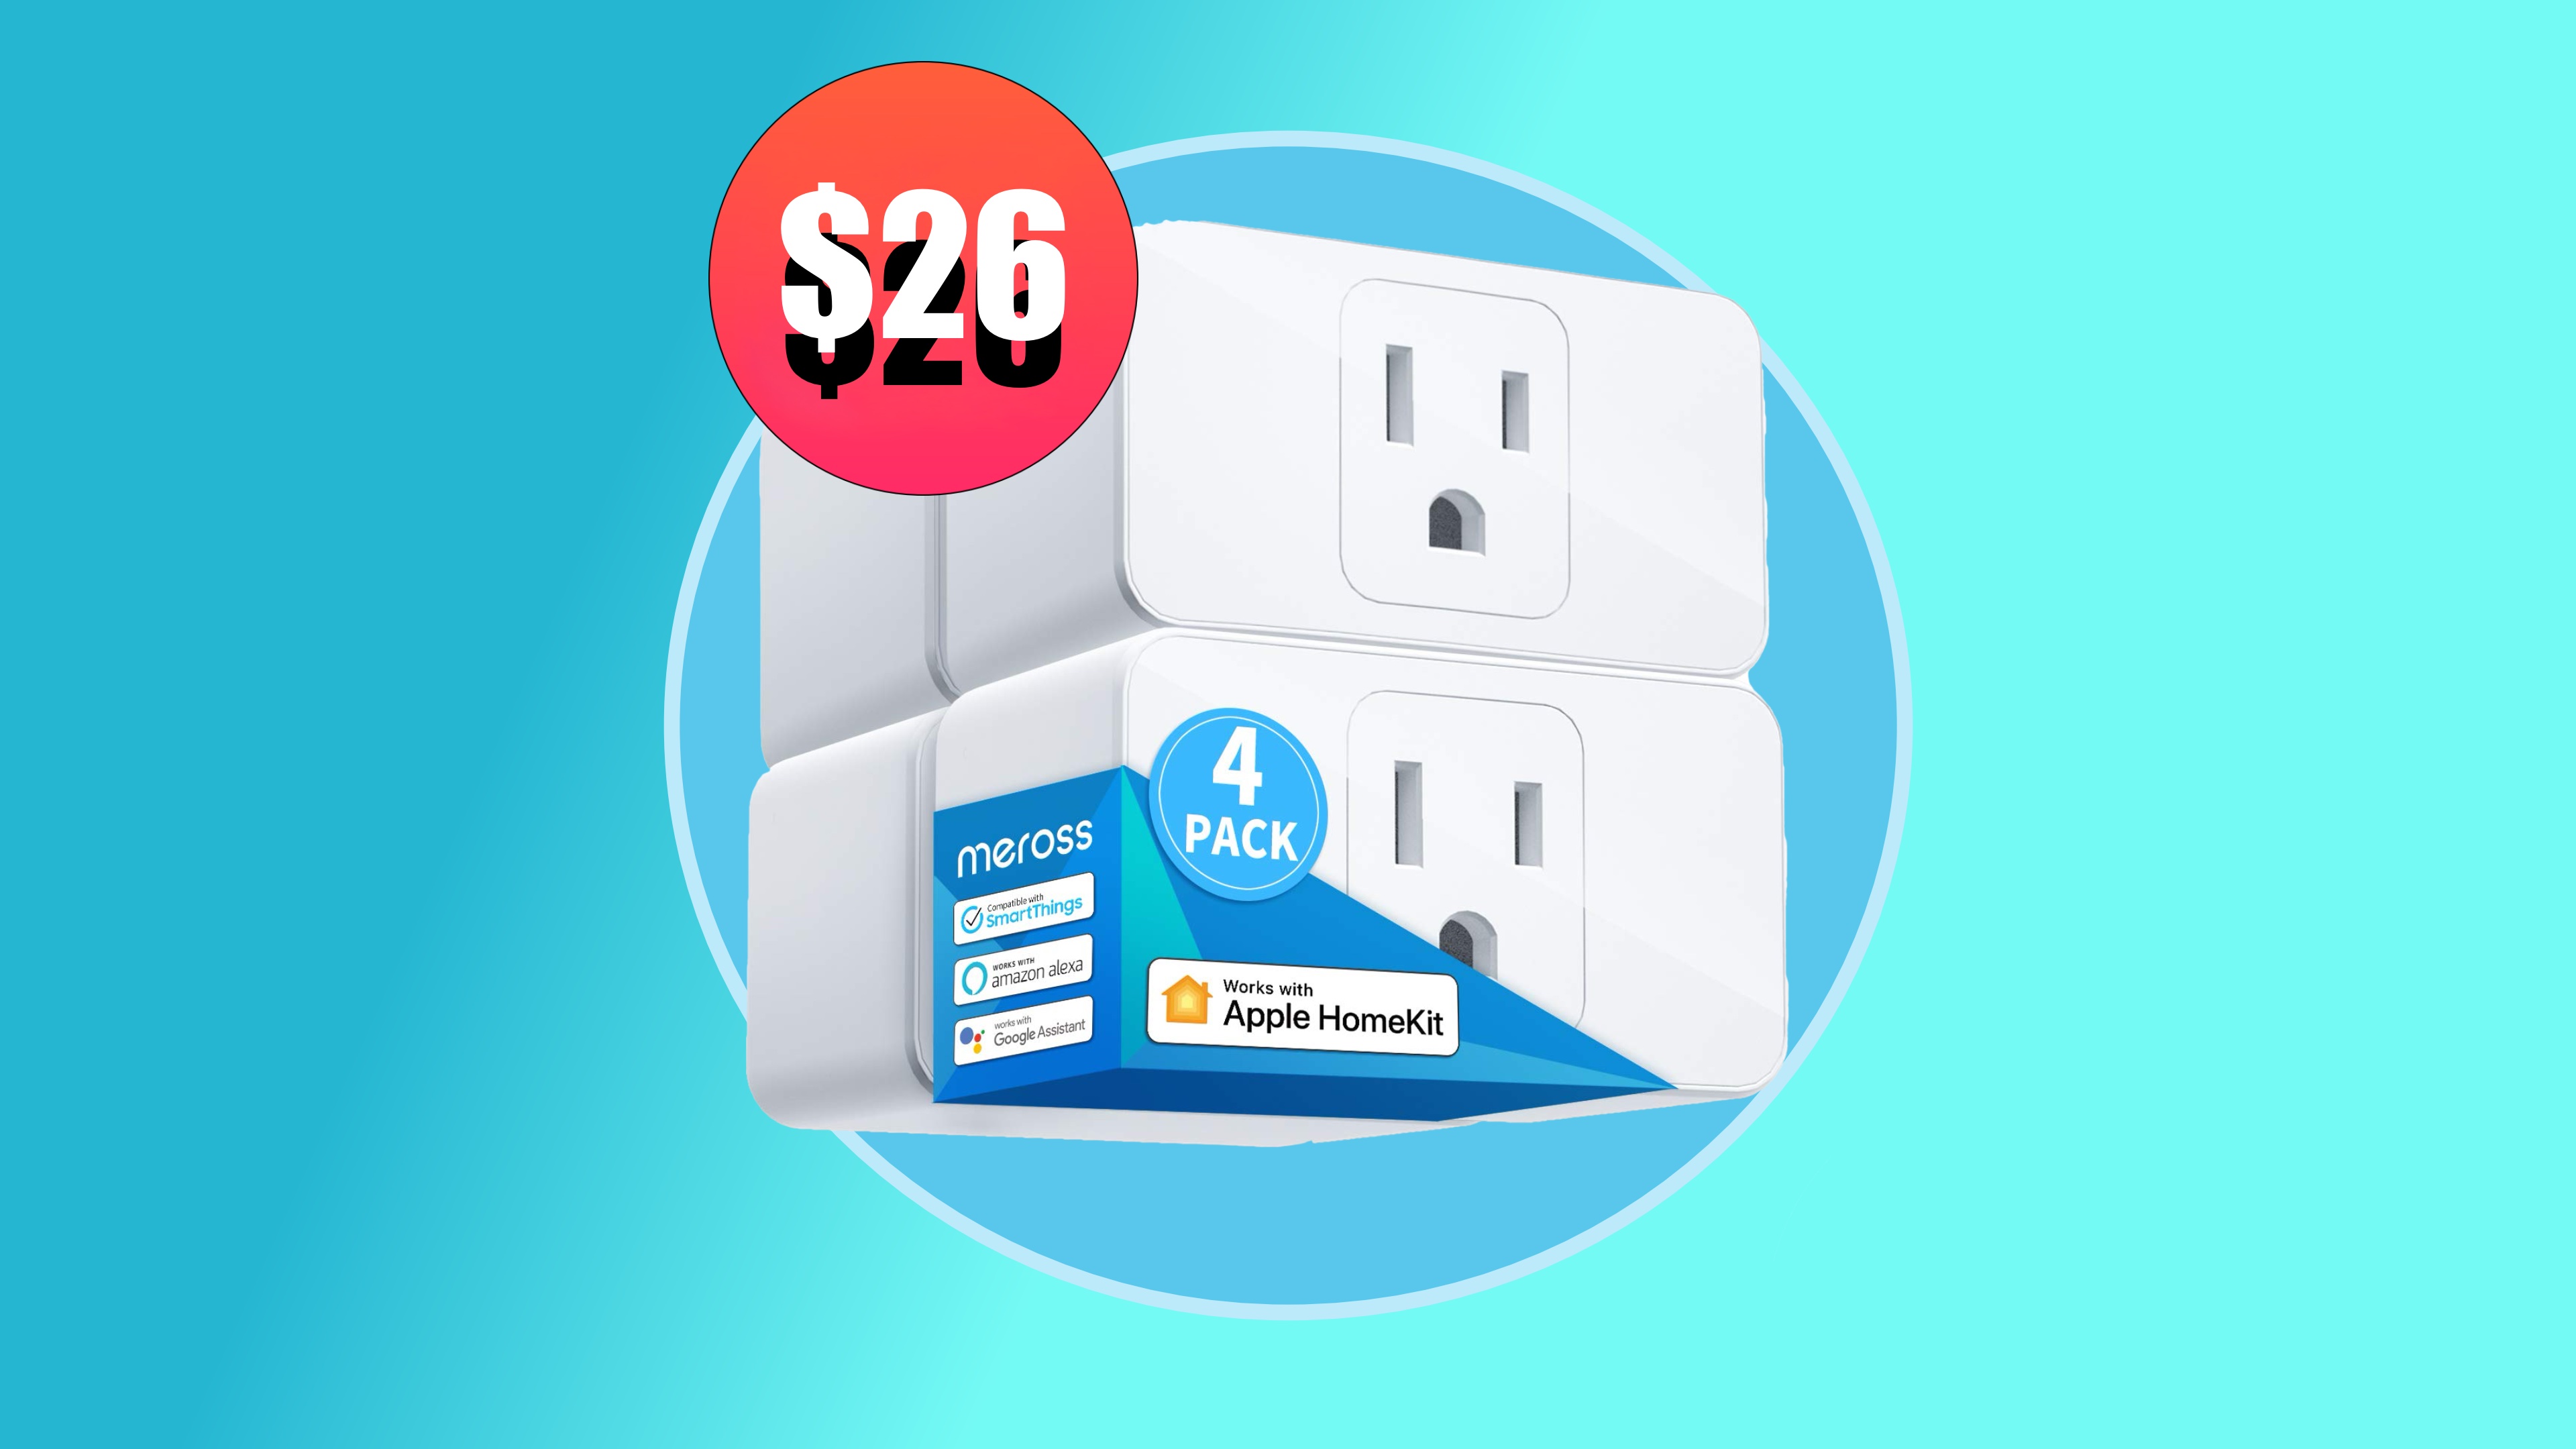 Don’t miss your chance to get this 4-pack of HomeKit mini smart plugs for just $26